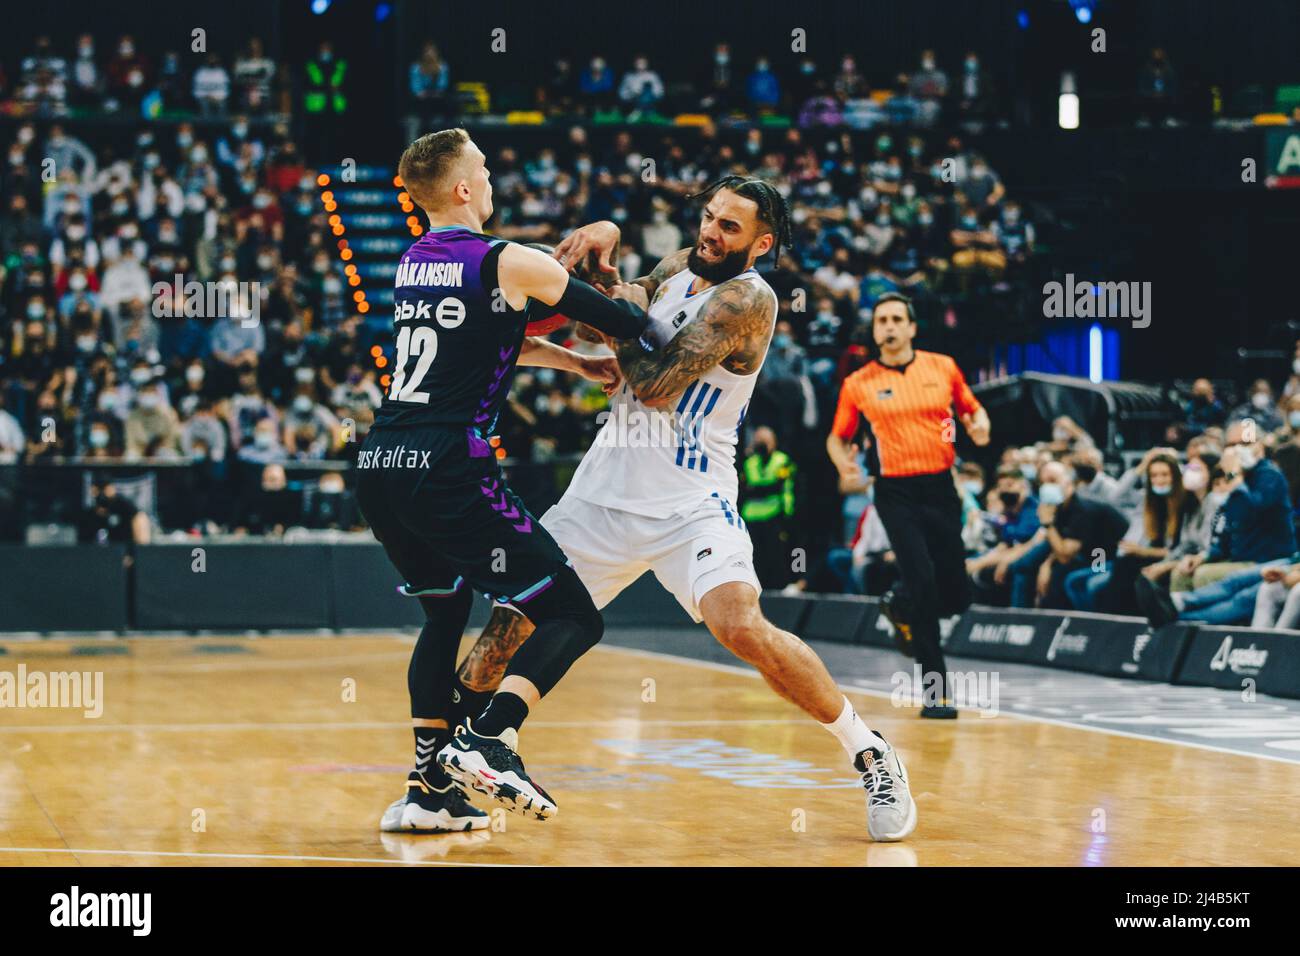 Bilbao, Basque Country, SPAIN. 13th Apr, 2022. LUDDE HAKANSON (12) of Bilbao  Basket and JEFF TAYLOR (44) of Real Madrid fighting for the ball during the  Liga ACB game between Surne Bilbao